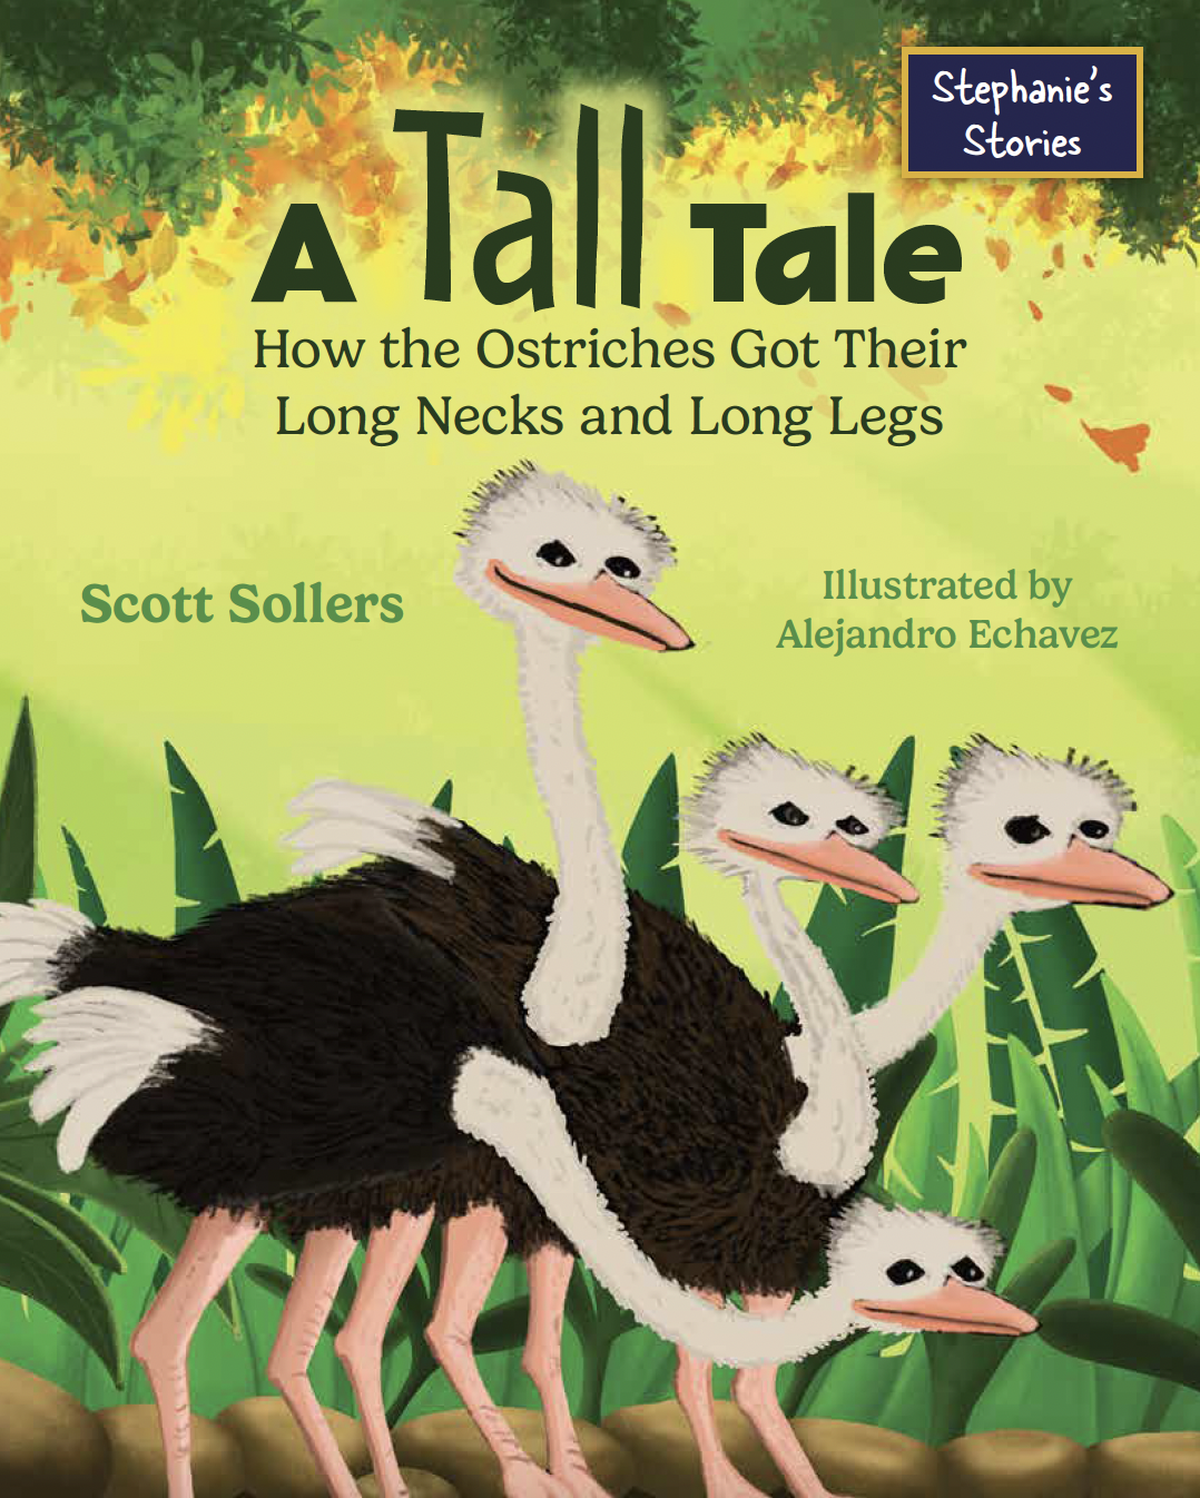 Cover page of “A Tall Tale,” written by Scott Sollers and illustrated by Alejandro Echavez.  (Courtesy of Expound Publicity )